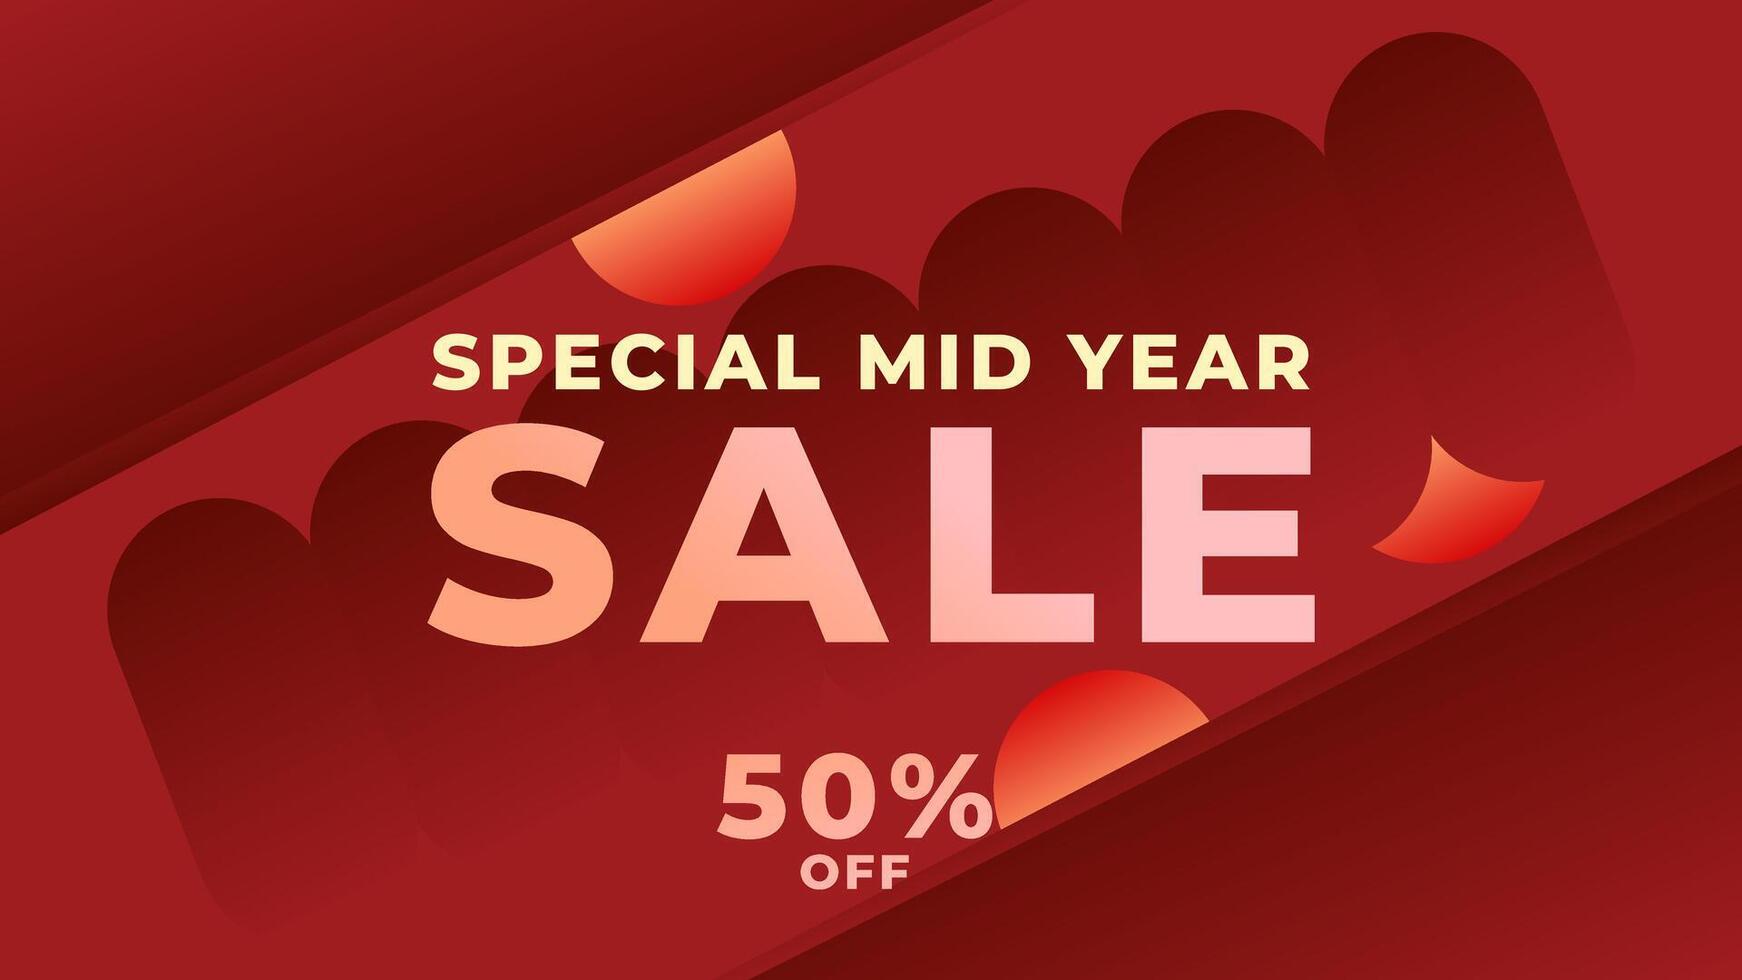 MID YEAR SALE OFFERS AND PROMOTION TEMPLATE BANNER DESIGN.COLORFUL GRADIENT COLOR BACKGROUND VECTOR. GOOD FOR SOCIAL MEDIA POST, COVER , POSTER vector